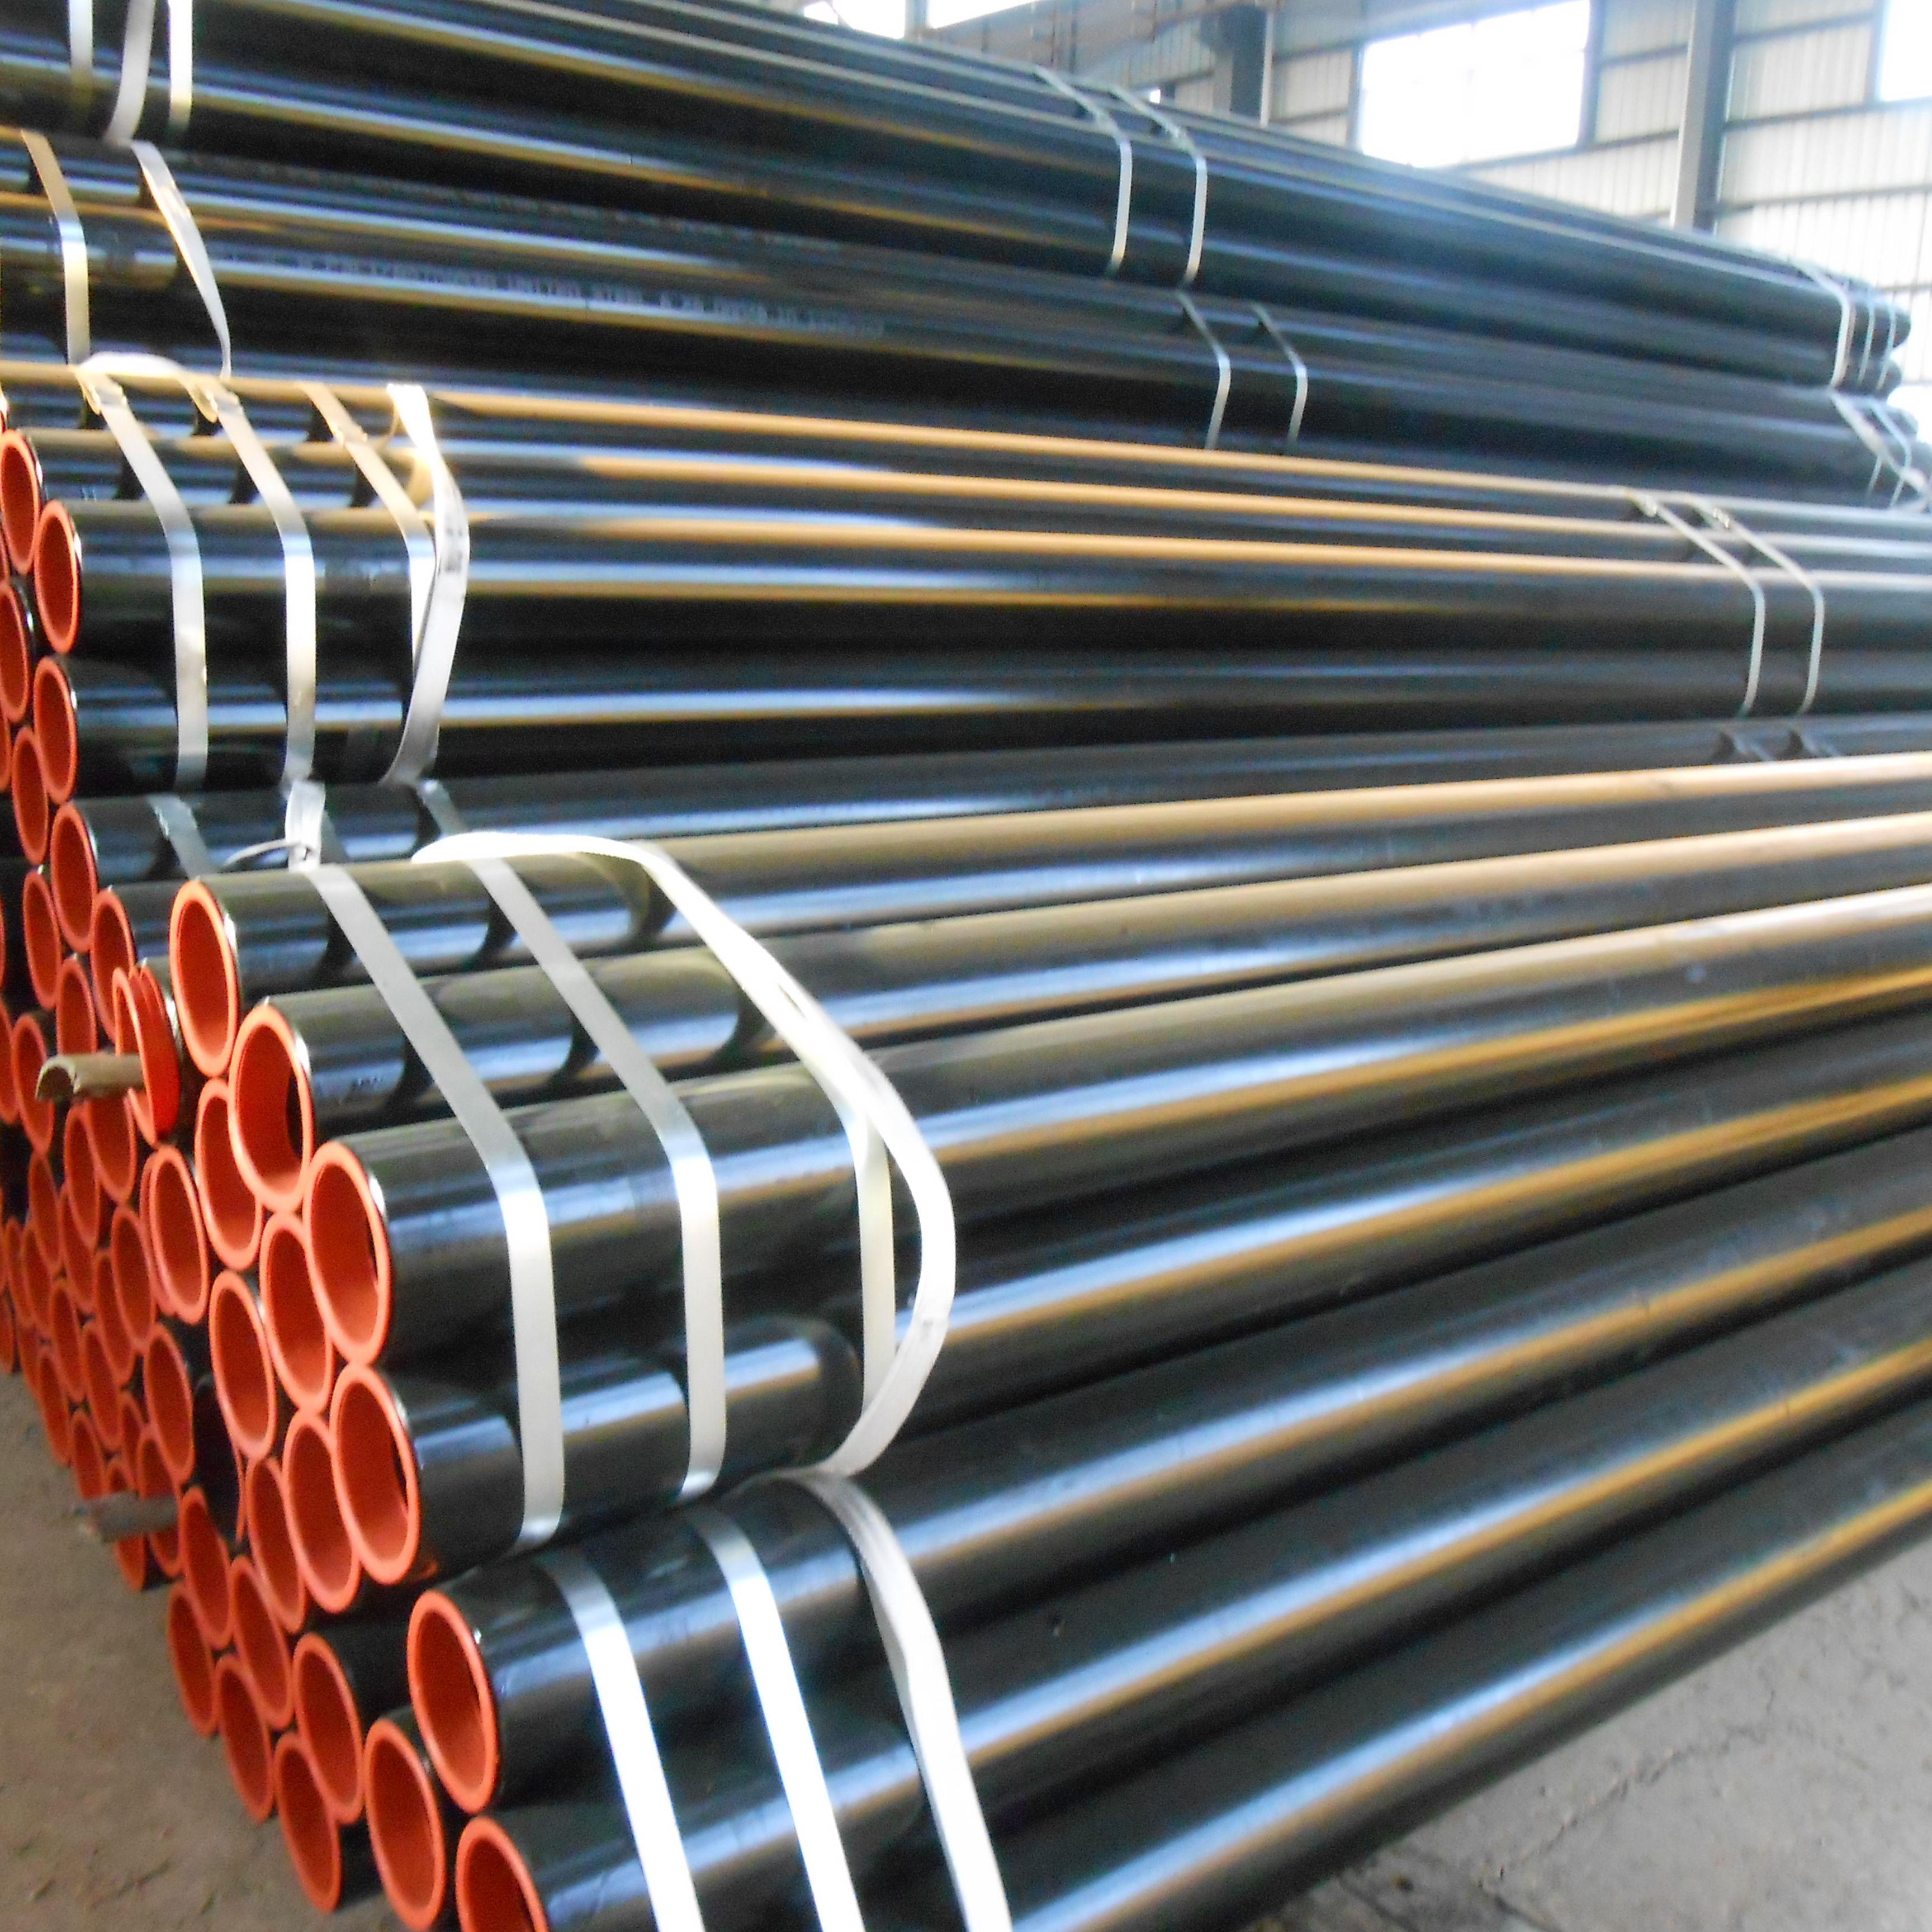 Steel Tube Manufacturer Expanding to Richmond – Inside INdiana Business